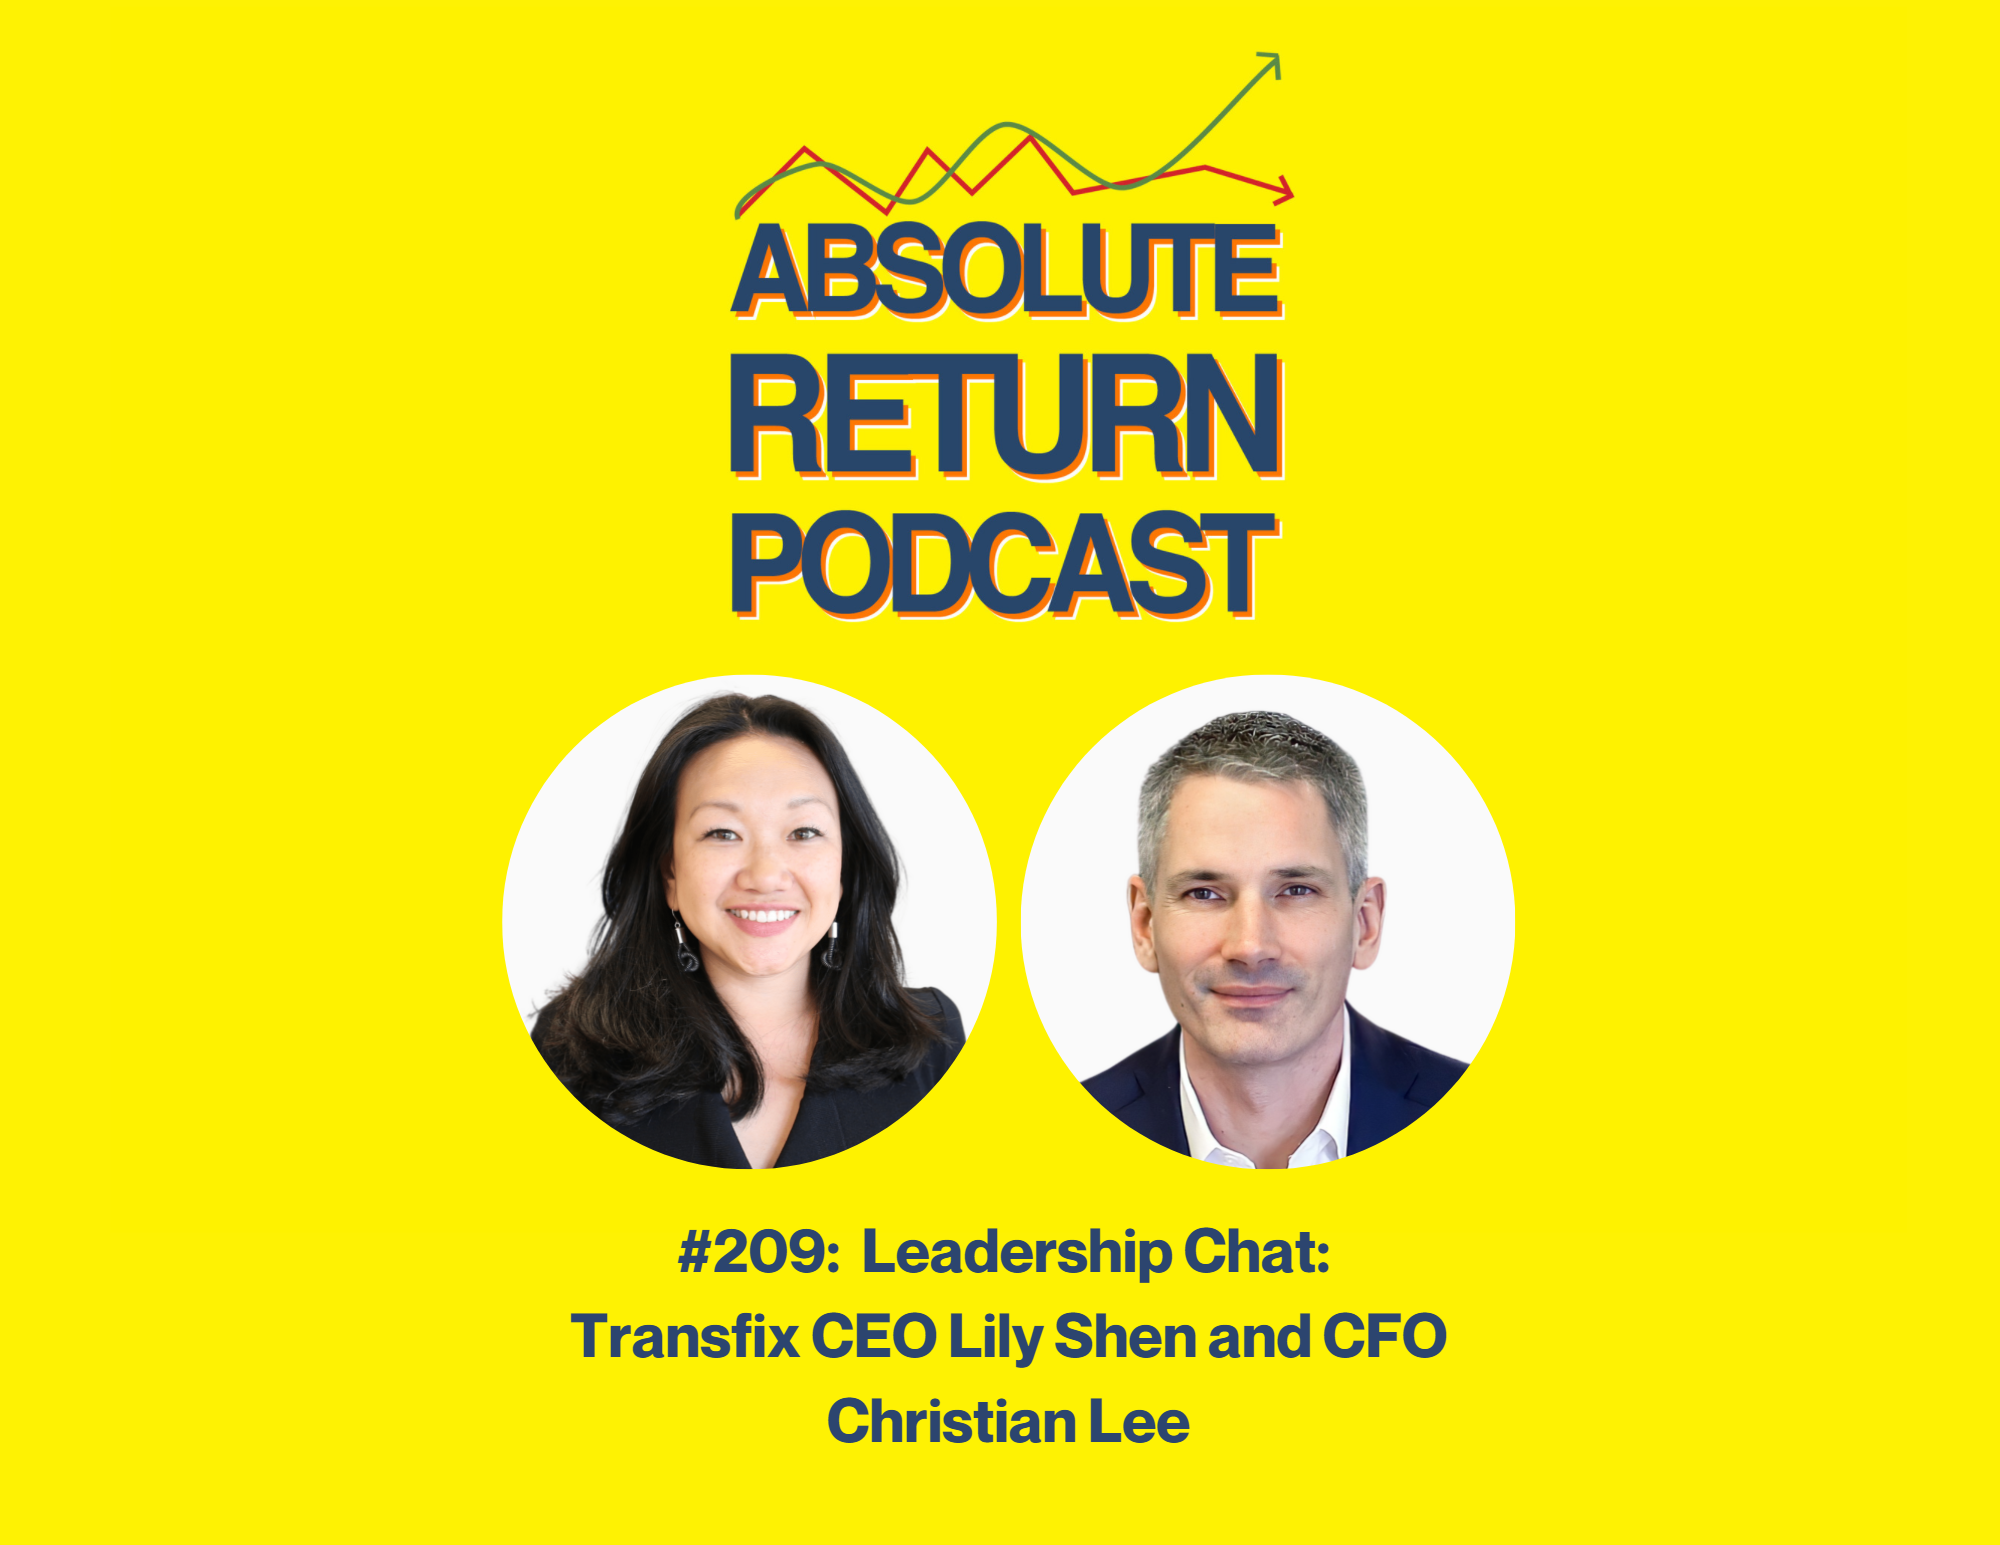 Absolute Return Podcast #209: Leadership Chat: Transfix CEO Lily Shen and CFO Christian Lee